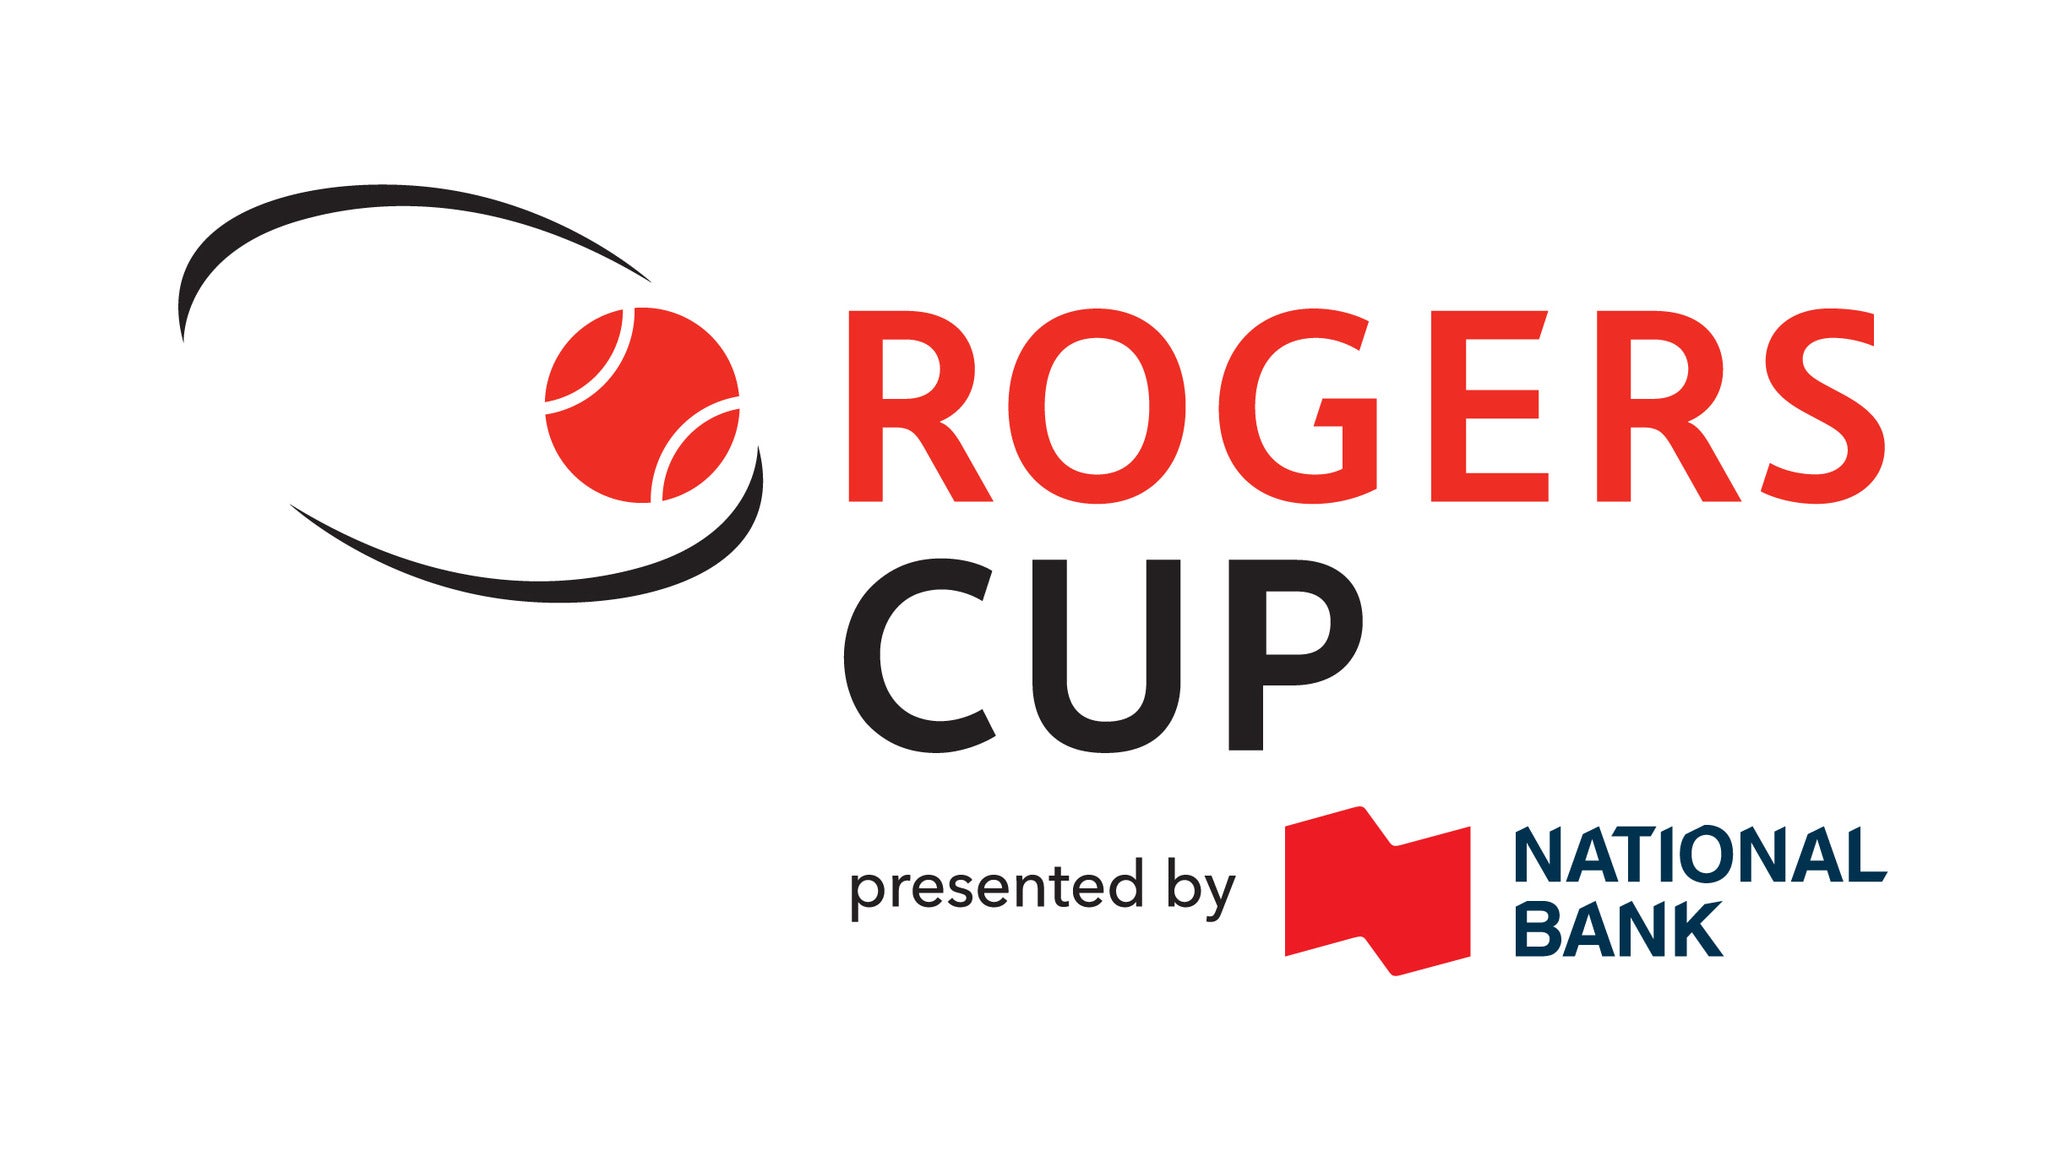 Rogers Cup (Toronto - WTA Women's Tennis) SEMIFINALS in Toronto promo photo for Championship Weekend  presale offer code